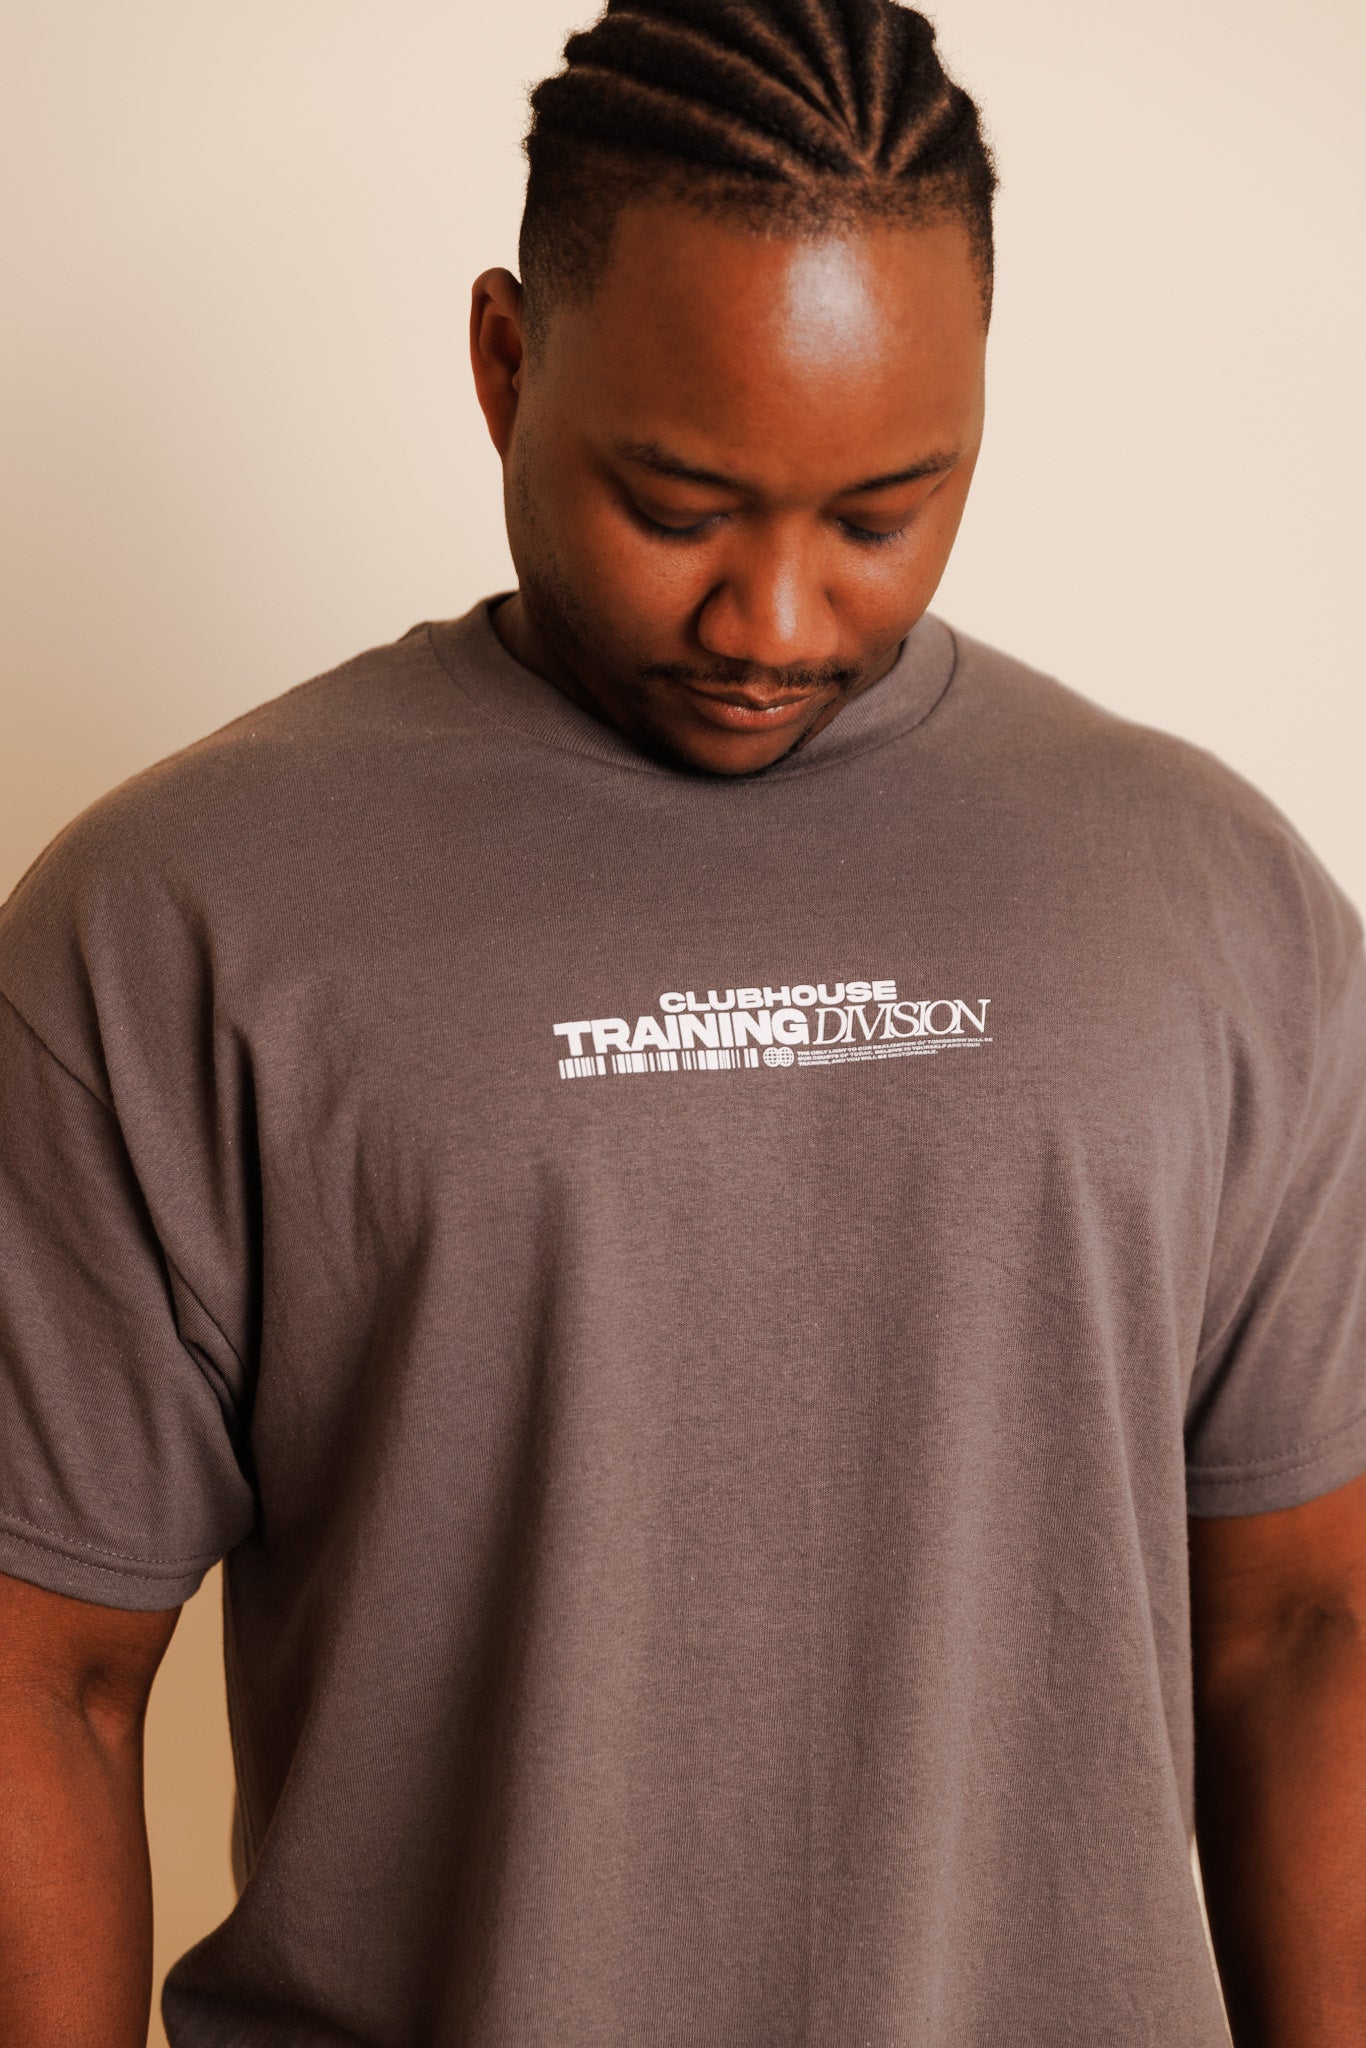 Training Division Tee - Charcoal Gray